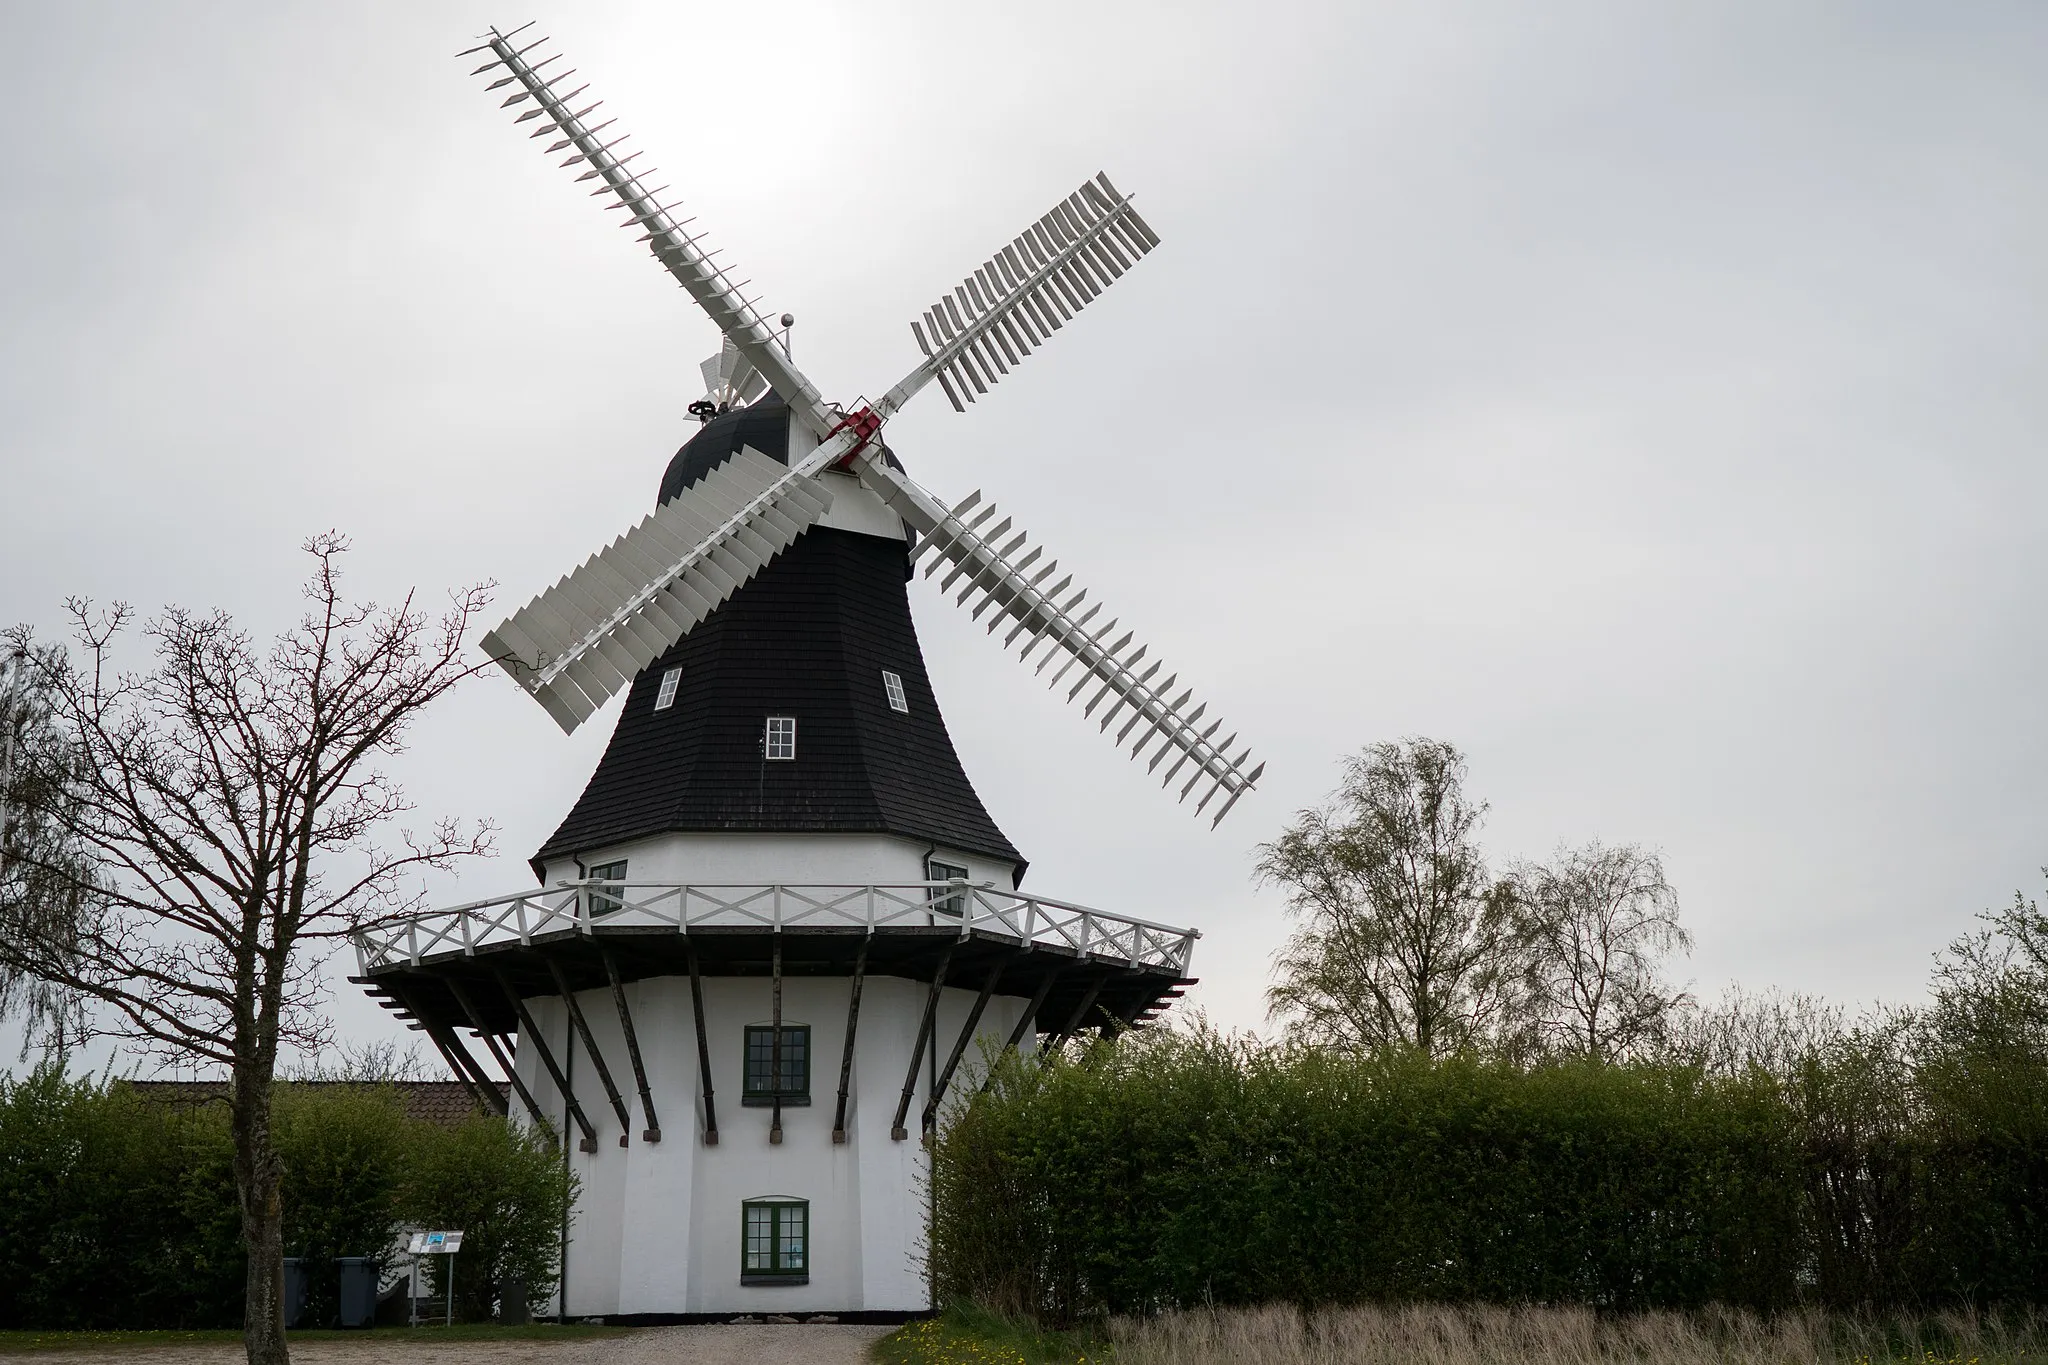 Photo showing: Egeskov Windmill in Denmark
From VisitDenmark:
The Dutch windmill Egeskov Mill 2 km from Egeskov Castle. The present mill was built in 1855. In 1952 Egeskov Mill became familiar to all Danes when the illustrator Ib Andersen used it as a motif on the new ten-kroner note, and to many people it is still known as the Ten-Kroner Mill.

www.visitdenmark.nl/nl/denmark/egeskov-mill-gdk613727